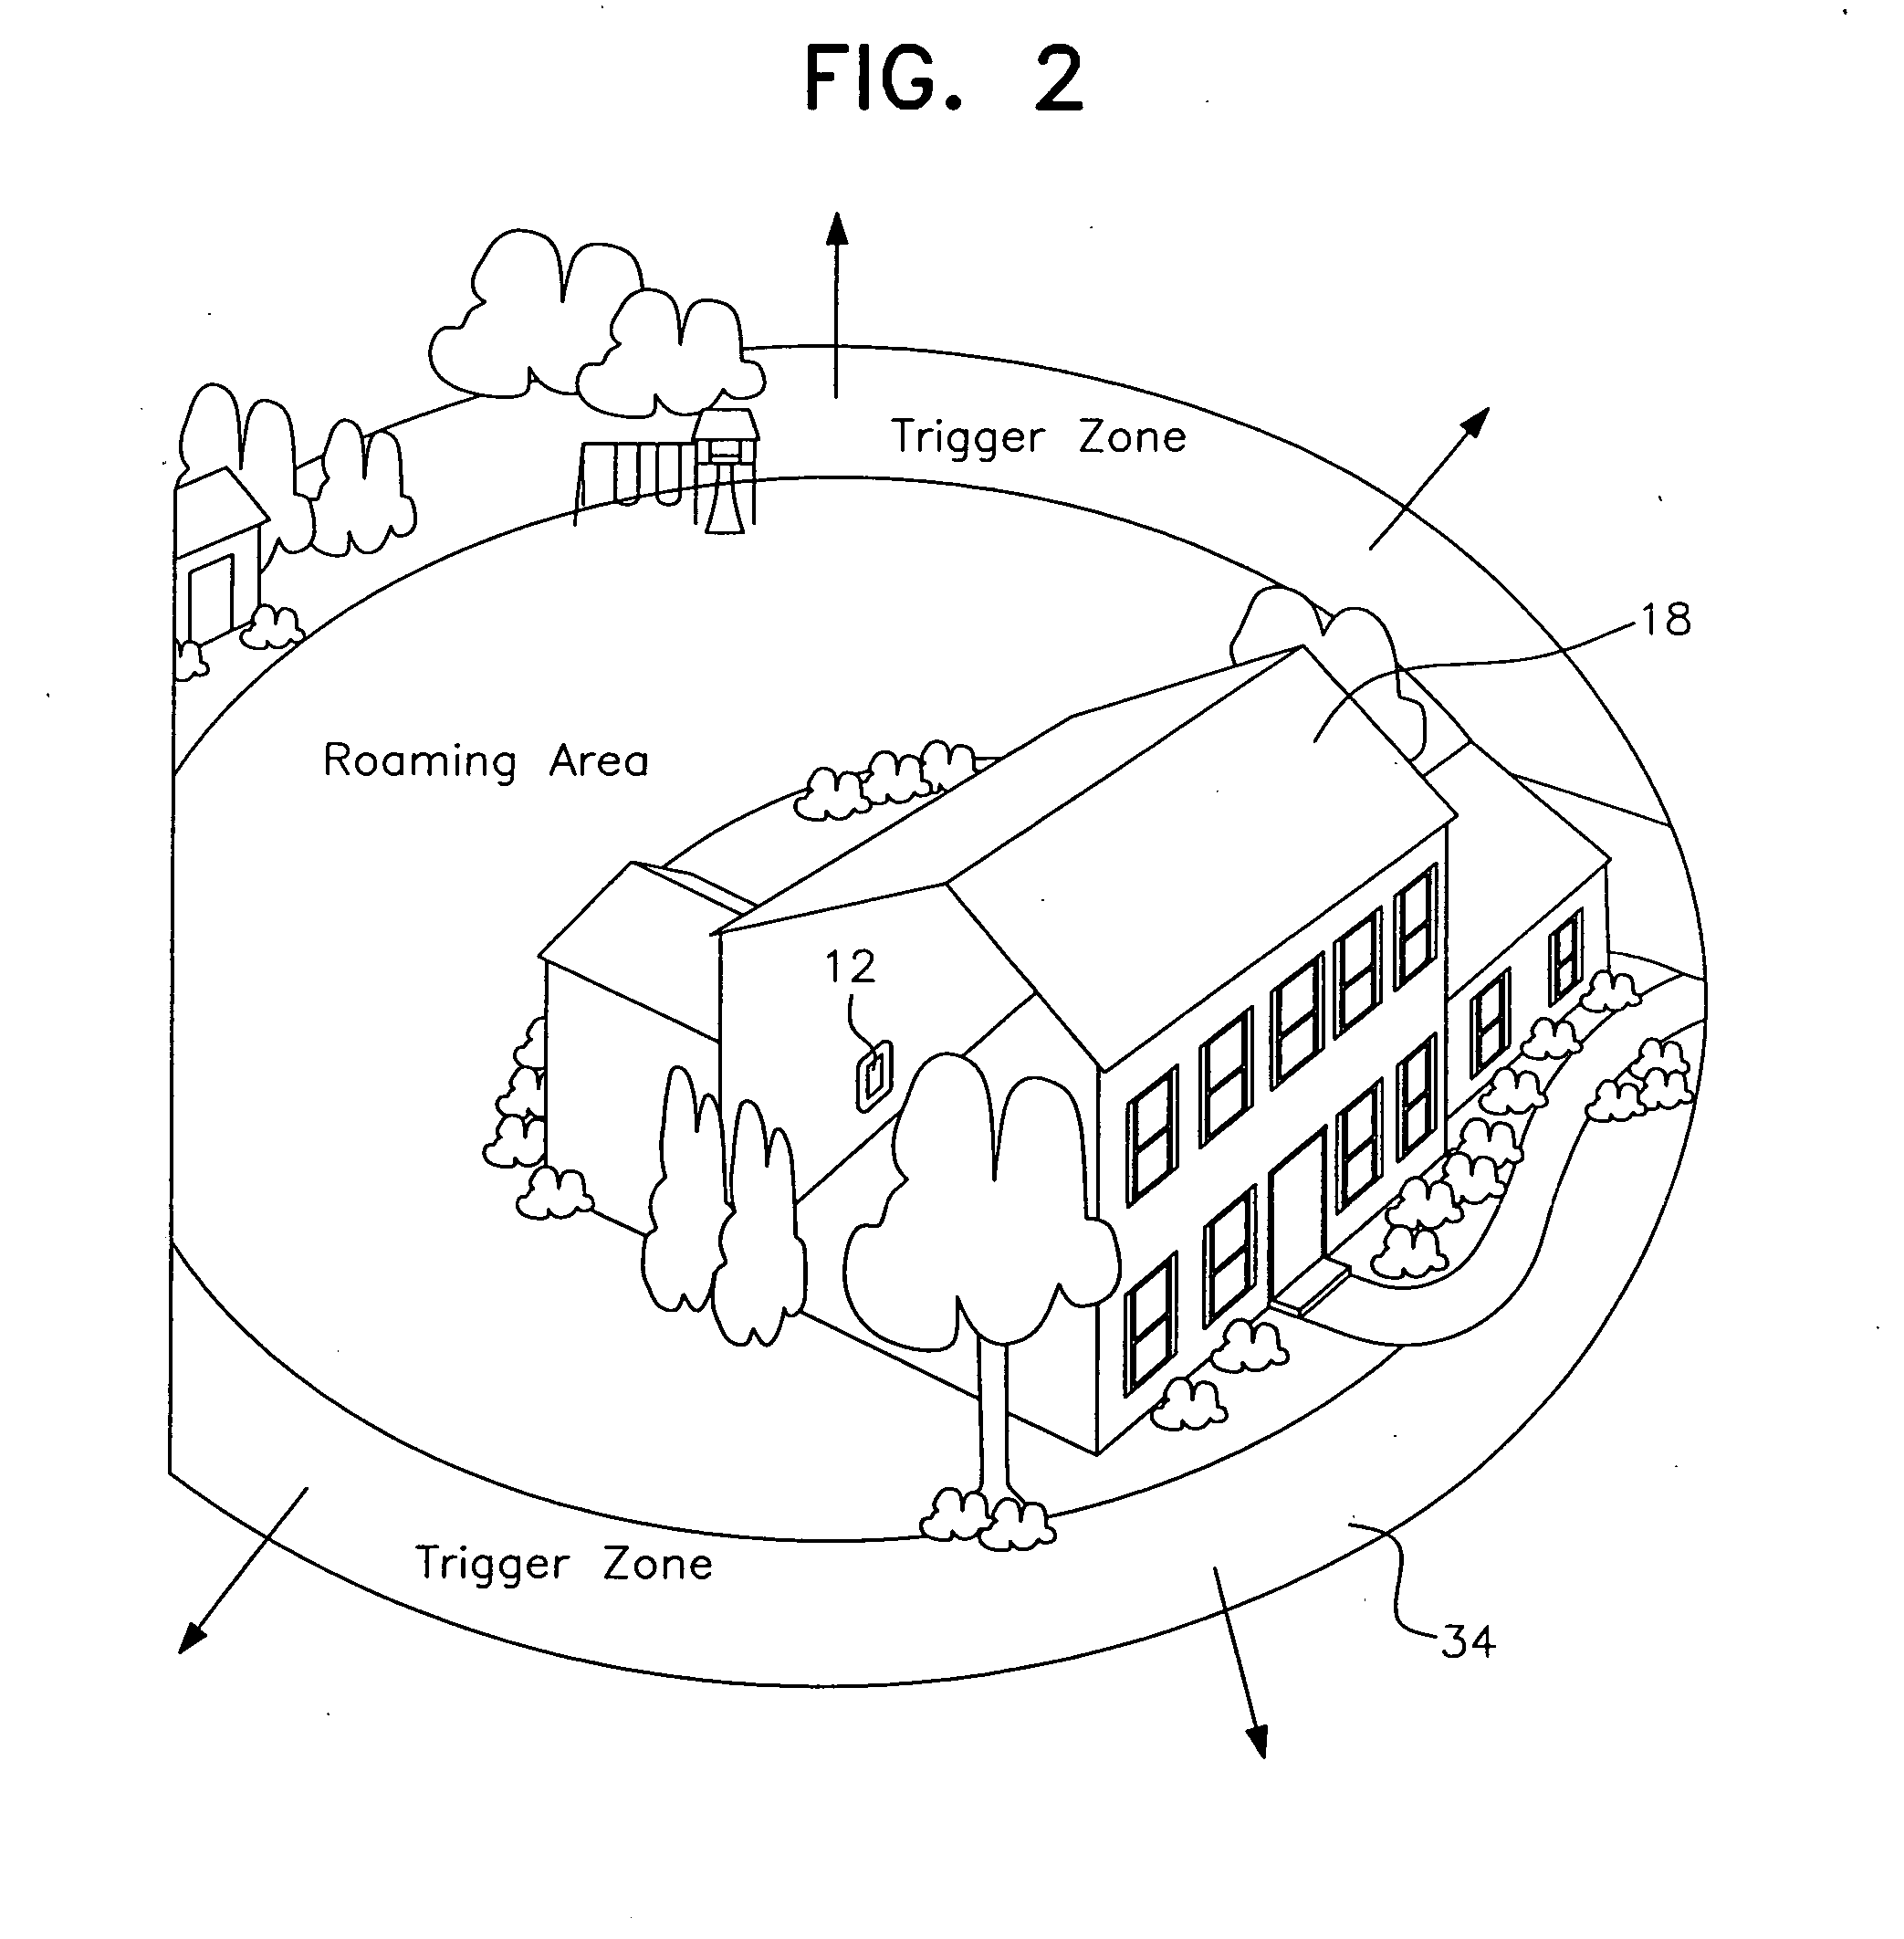 Radial-shape wireless dog fence system and method